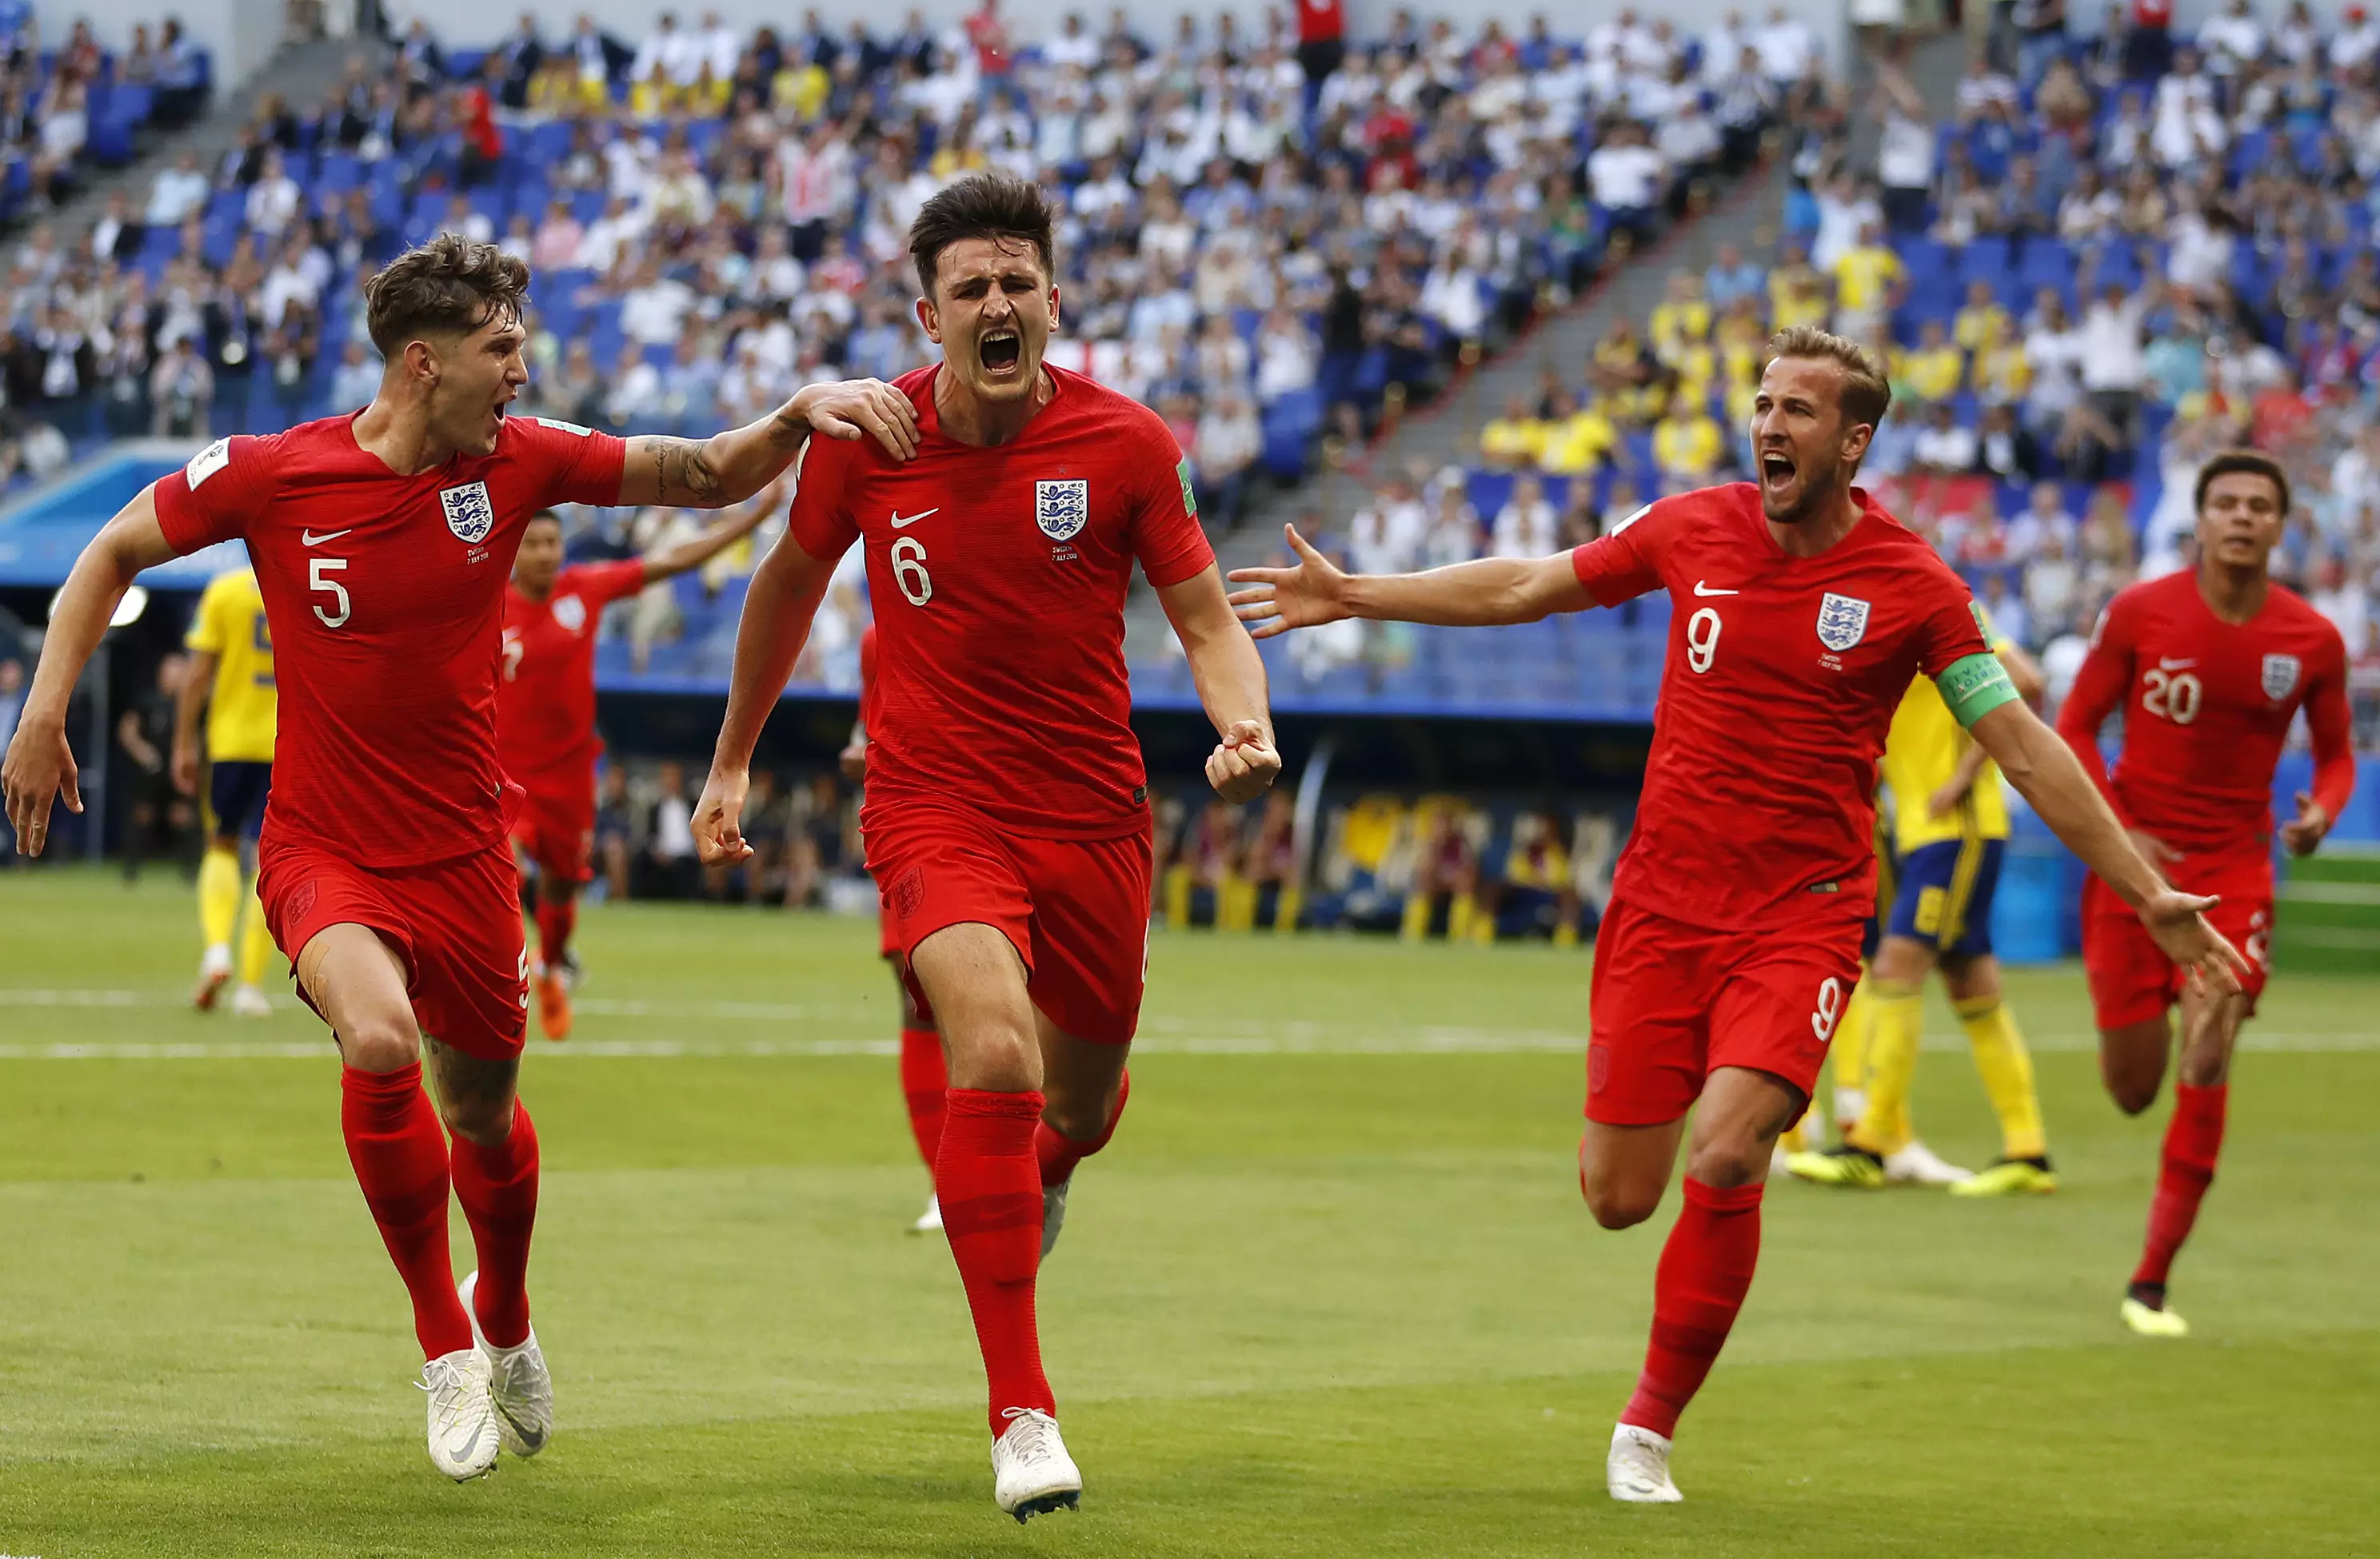 Maguire wheels away in celebration. Image: PA